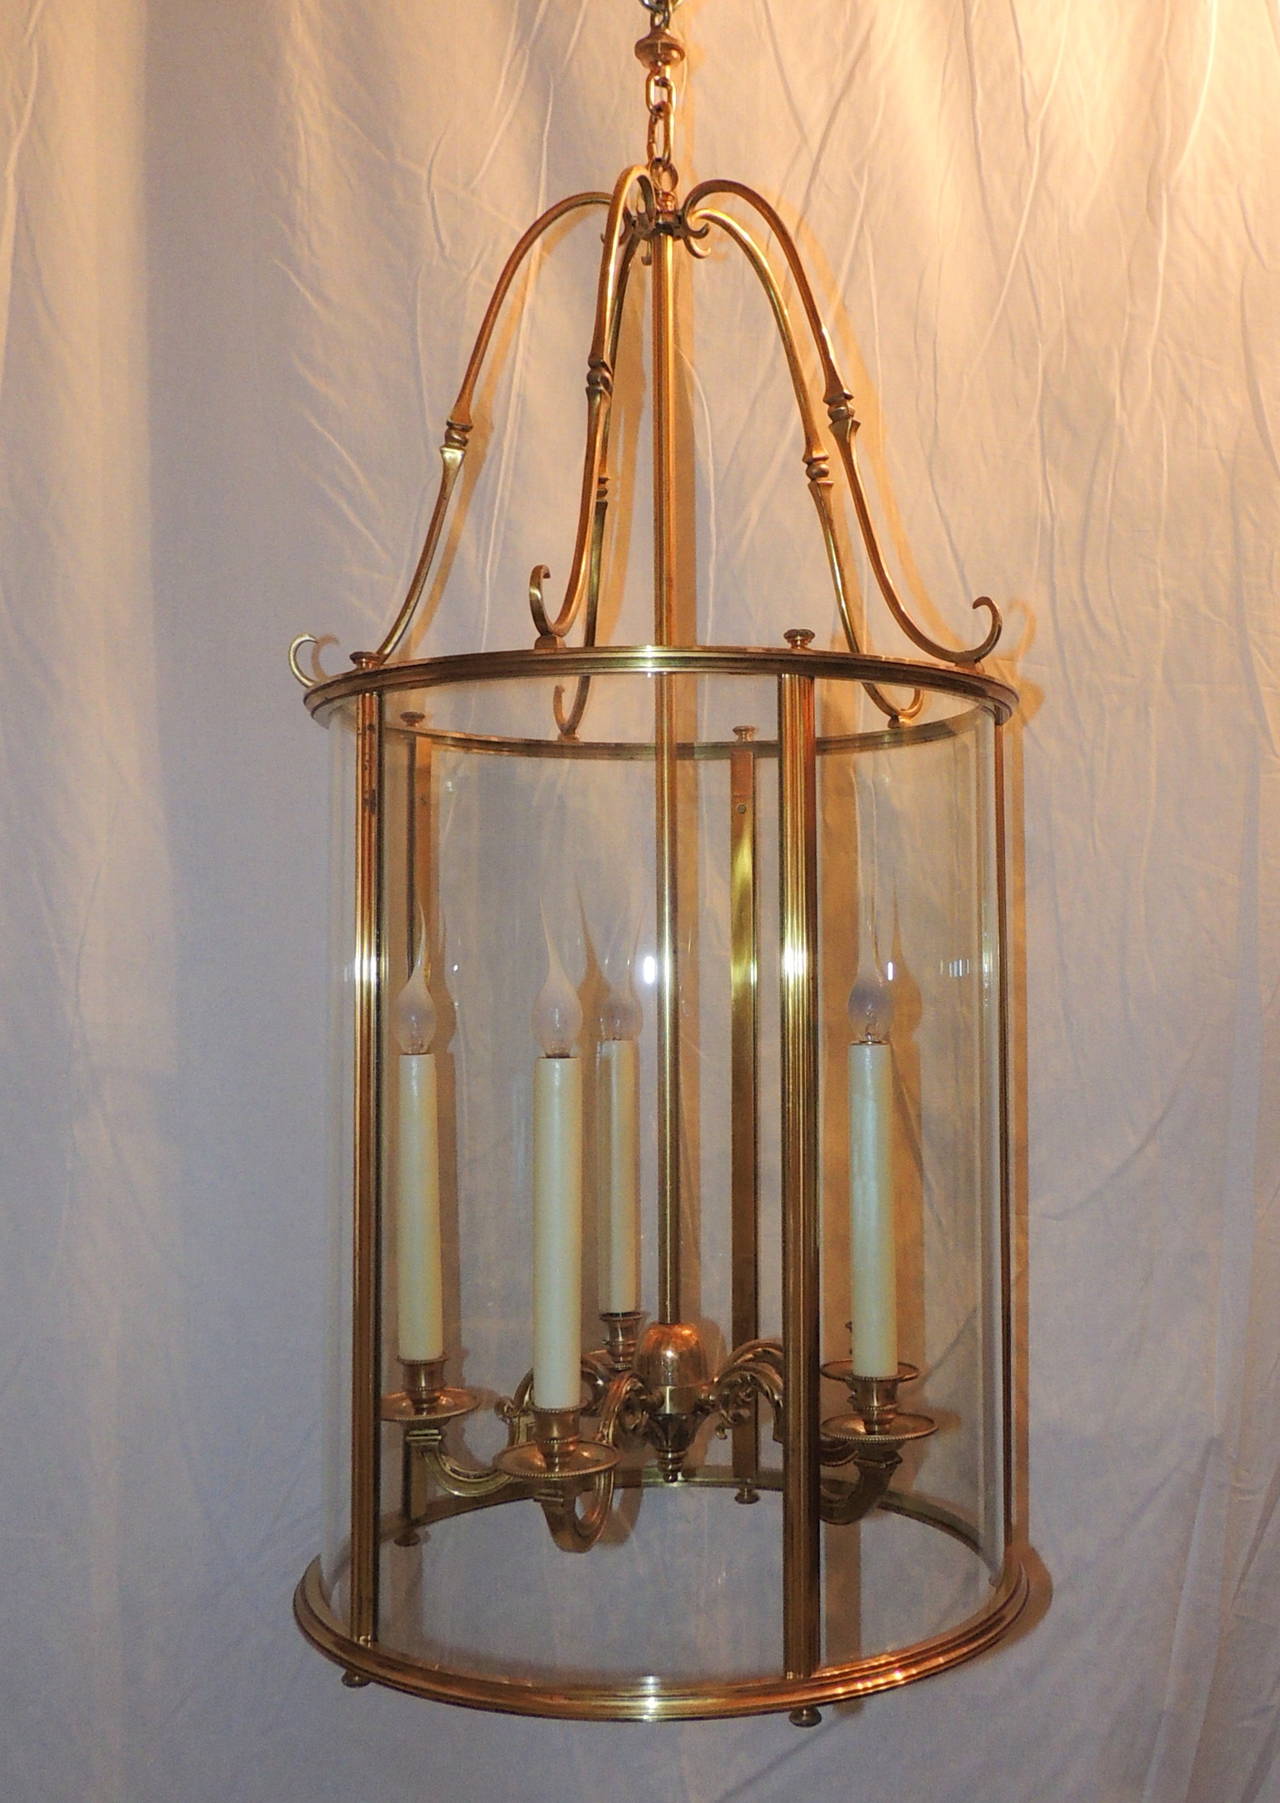 This five-light lantern with beautiful curved glass will set the mood in your room, entryway or porch with its large 20" height and 16" width the full length of the lantern from crown to edge is 34". Beautiful floral engraving